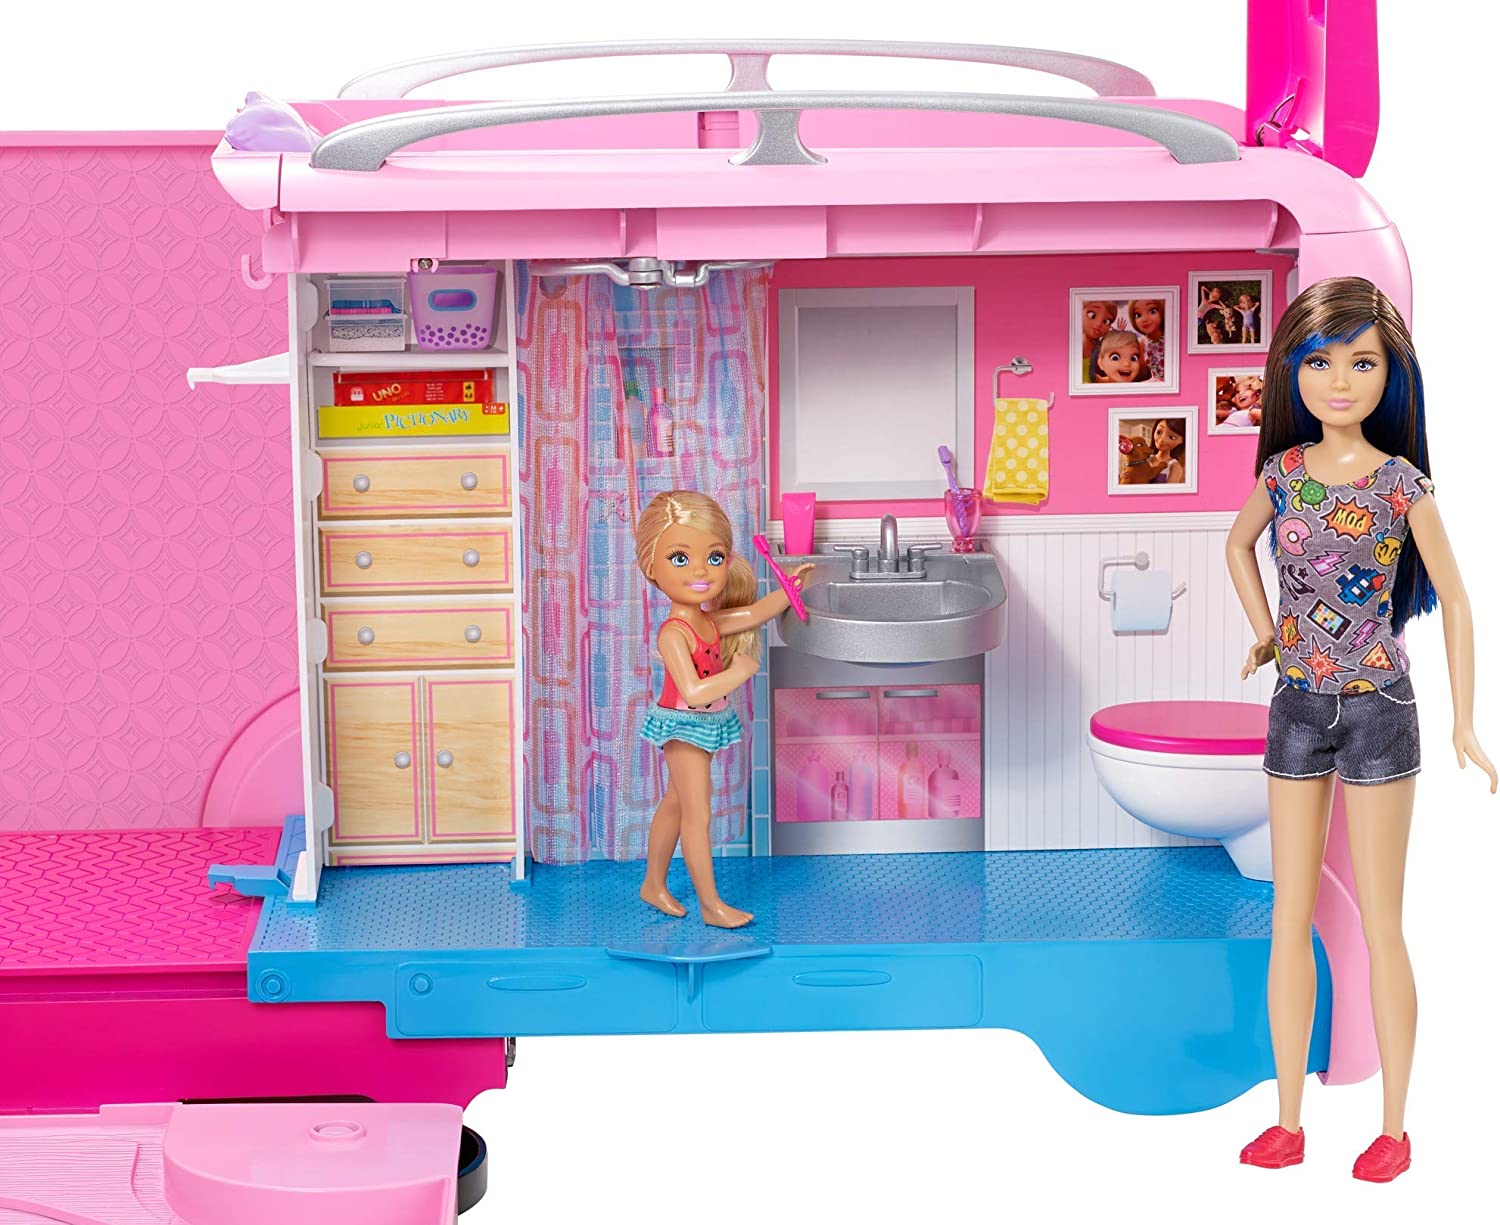  Barbie Camper Playset, DreamCamper Toy Vehicle with 60  Accessories Including Furniture, Pool and 30-inch Slide : Toys & Games